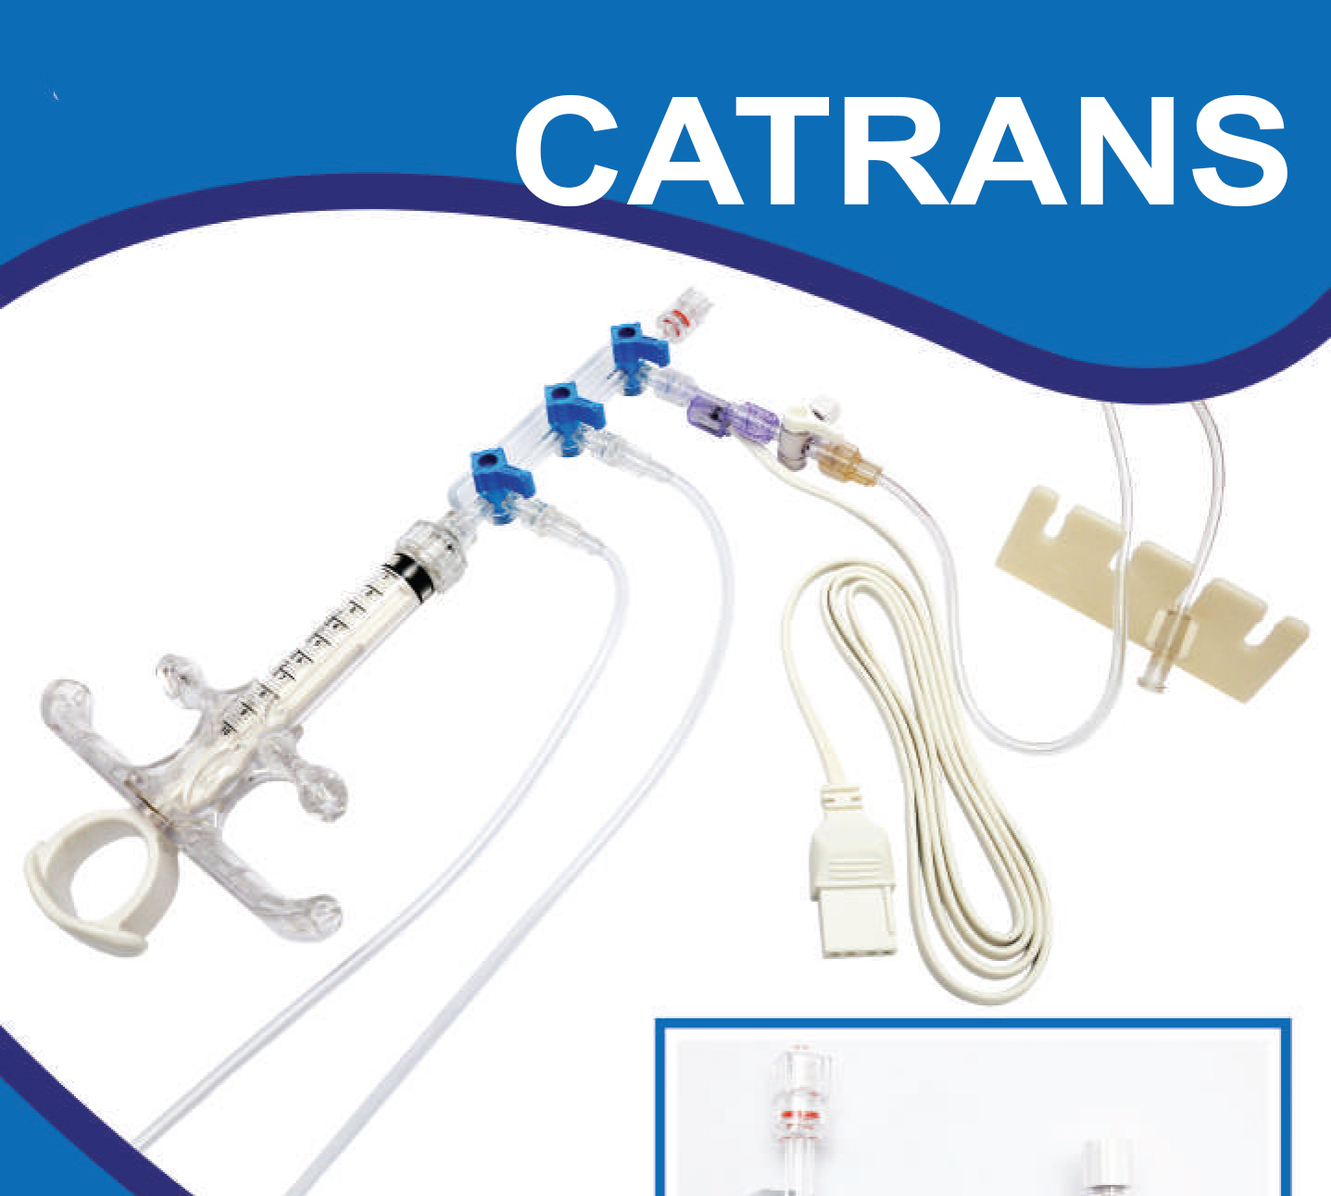 <p><span style="font-weight: bold;">CATRANS Angiographic System with Integrated Disposable Transducer</span><br></p>